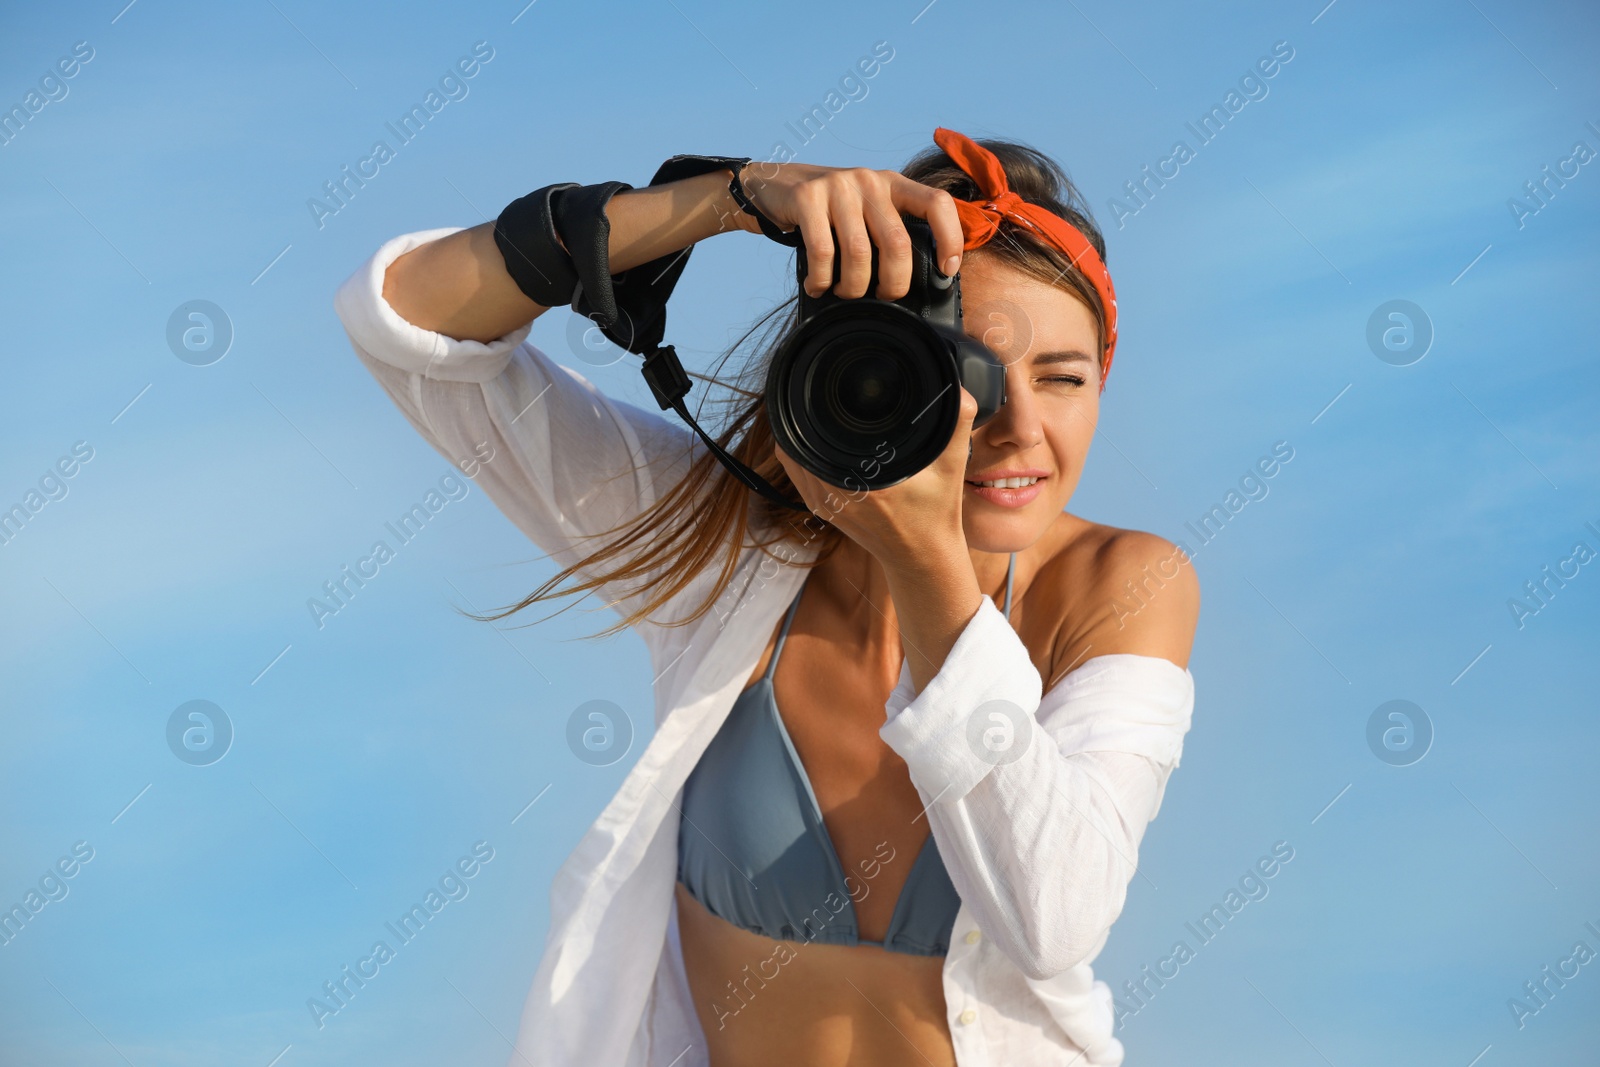 Photo of Photographer taking photo with professional camera outdoors